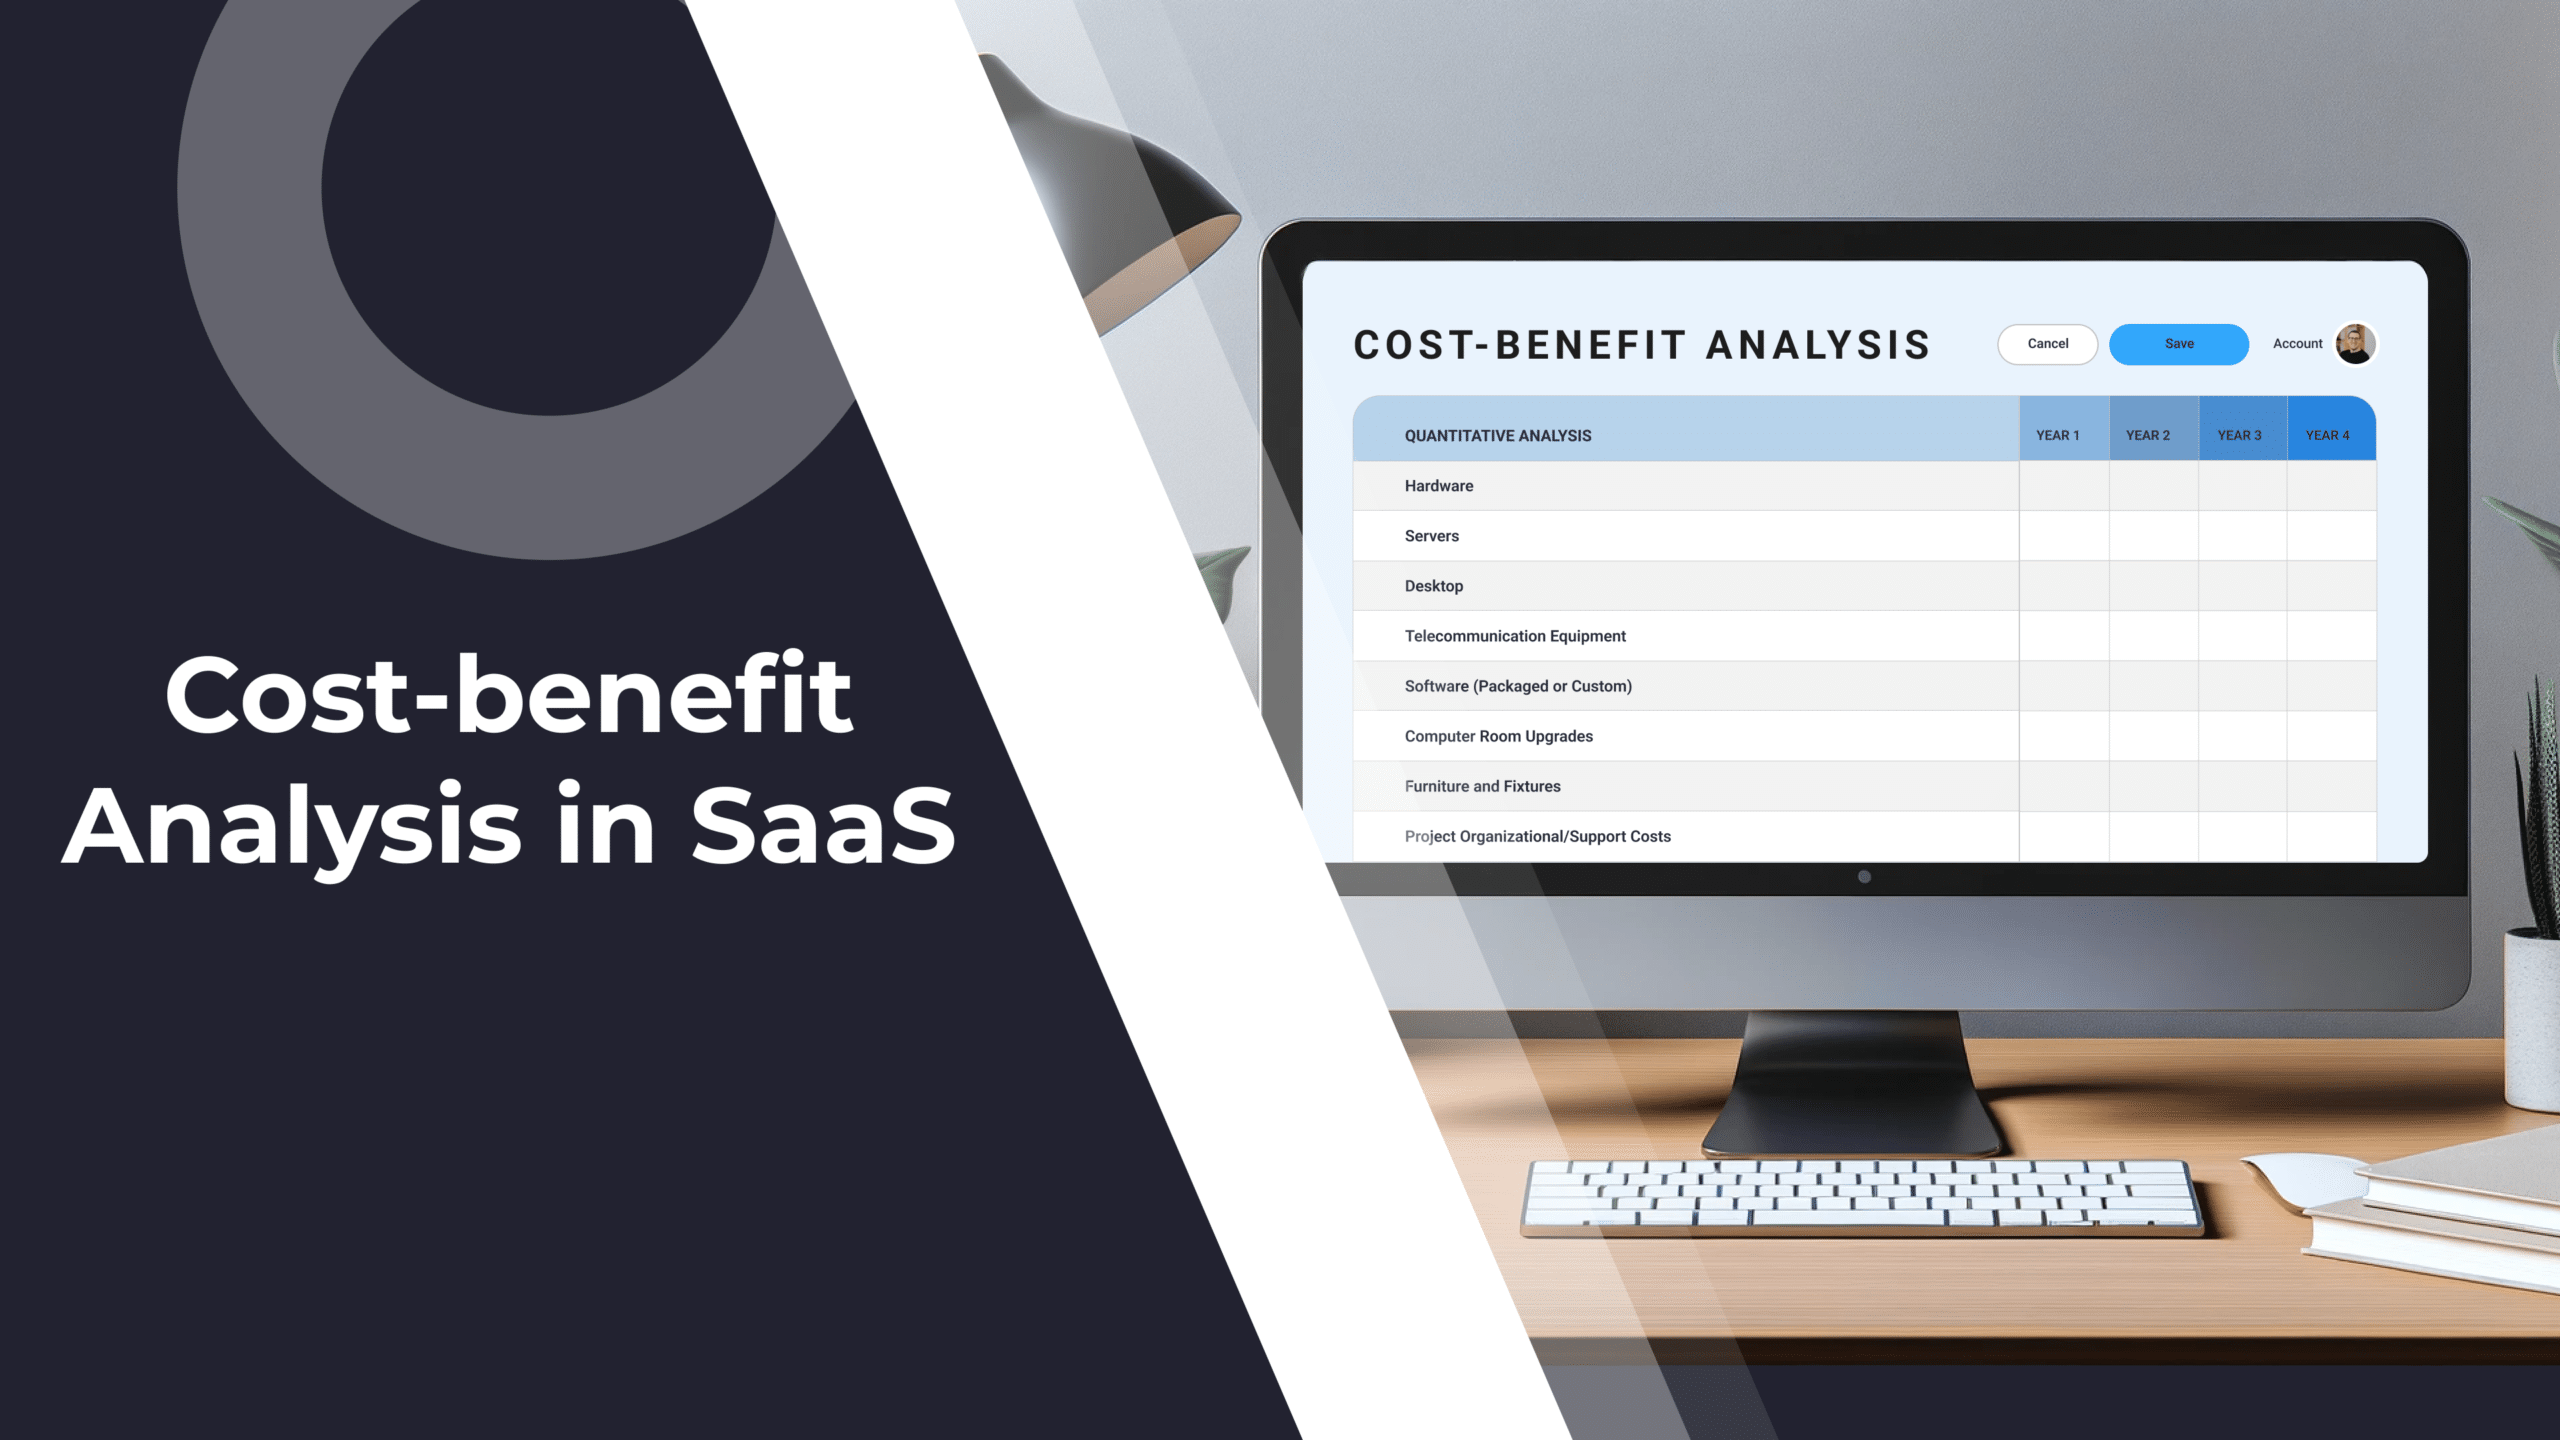 What’s the Cost-Benefit Analysis and How You Can Make the Best Use of It in SaaS & CS